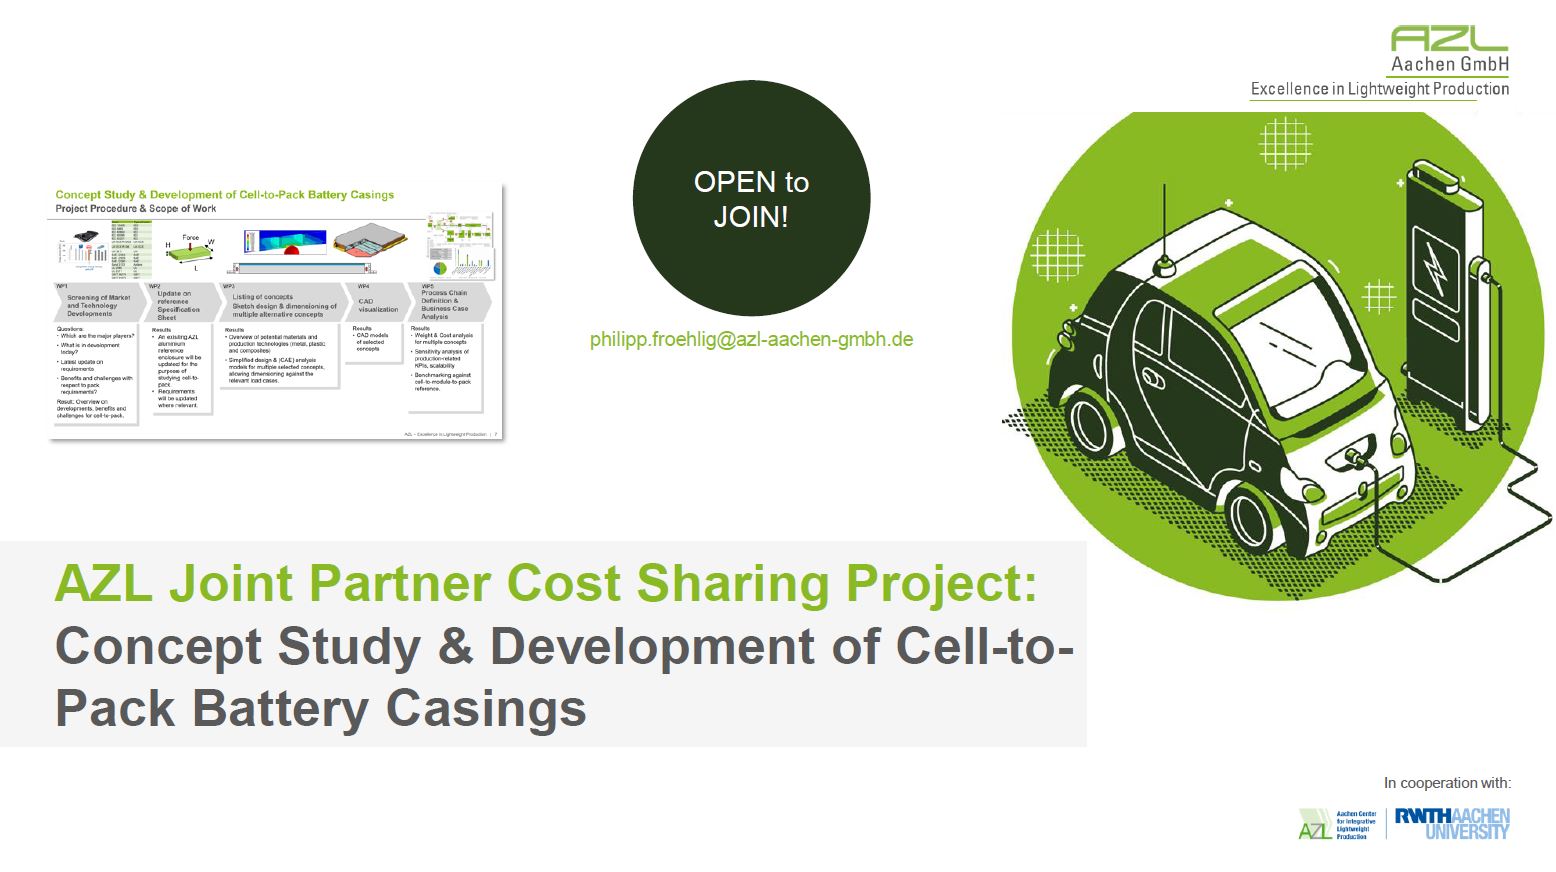 AZL Joint Partner Project: Concept Study & Development of Cell-to-Pack Battery Casings